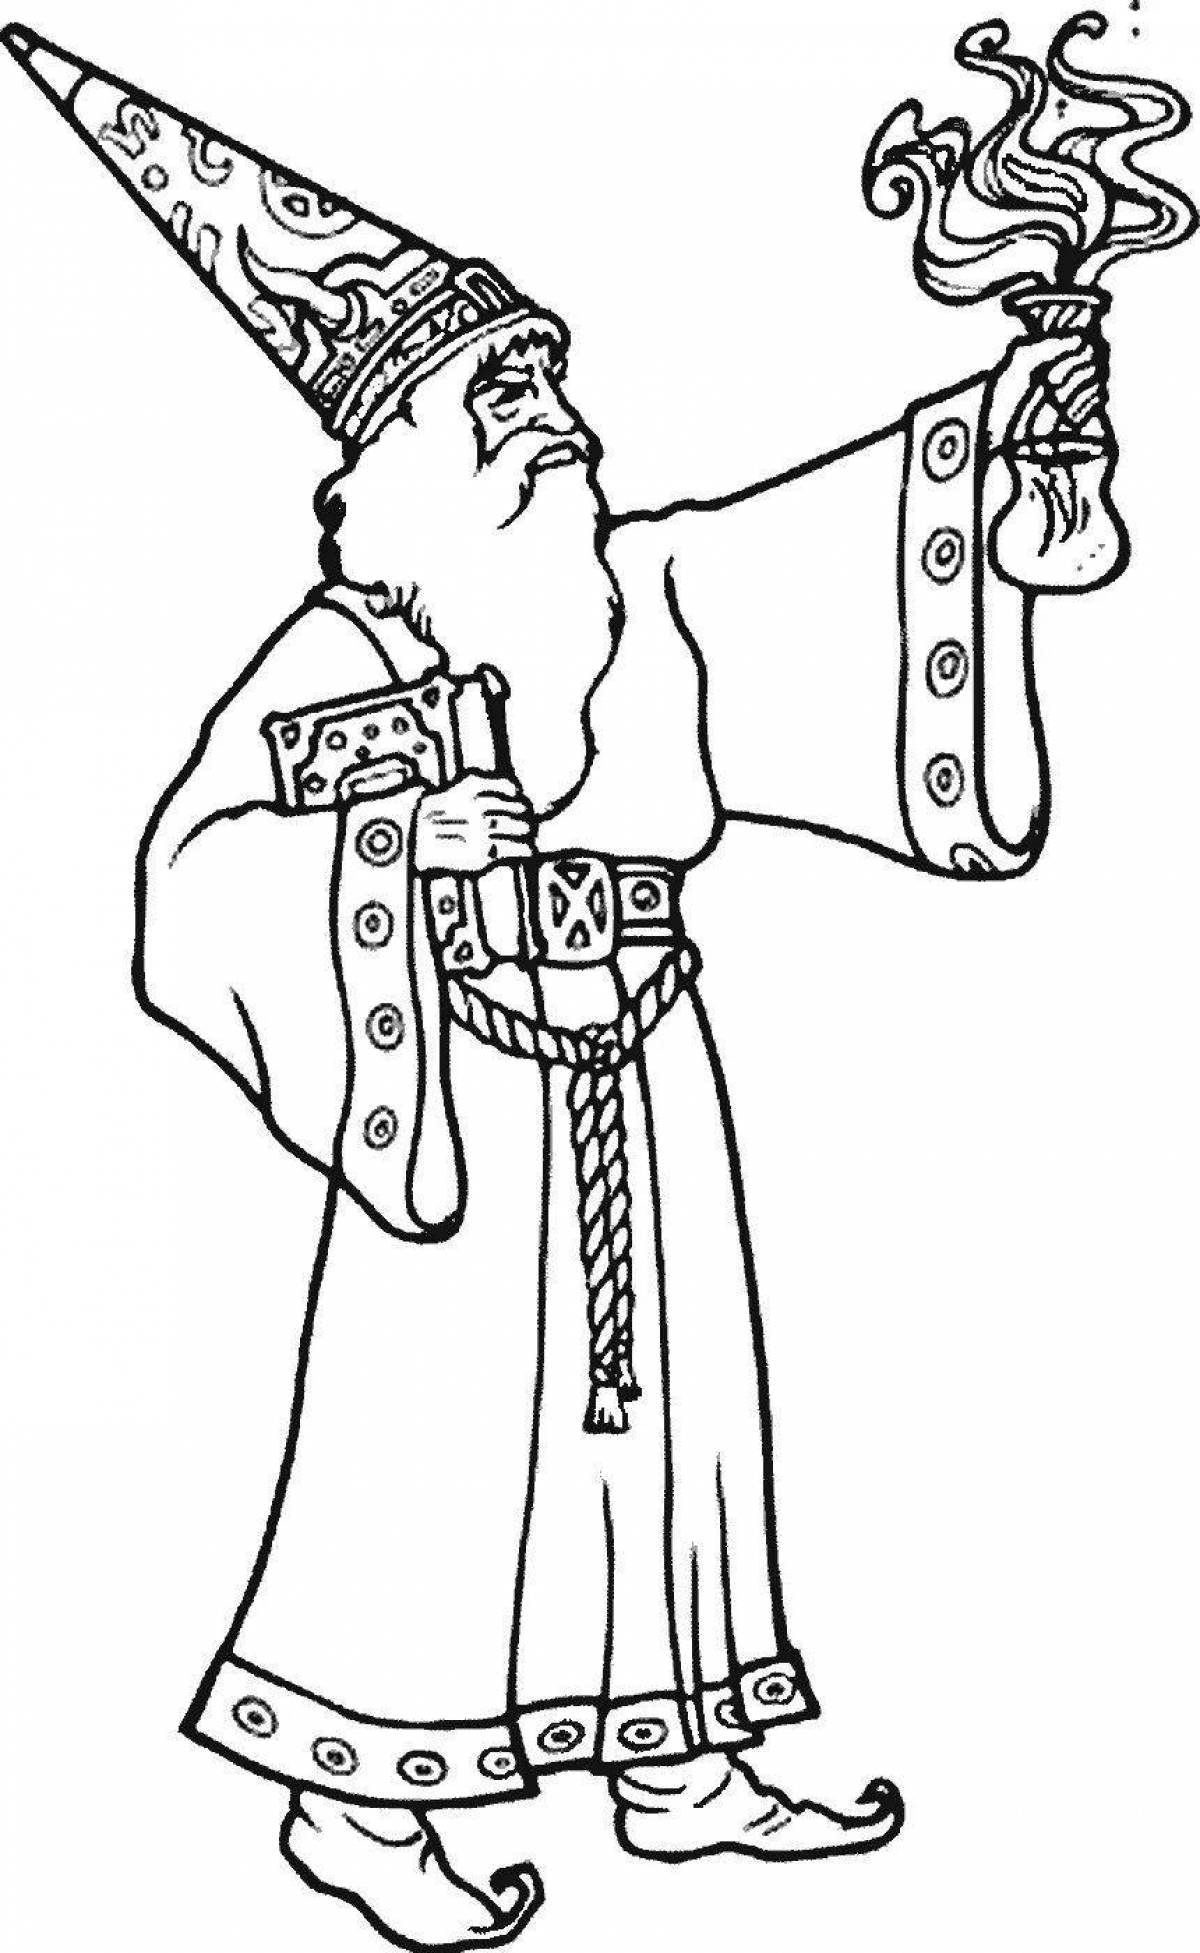 Charismatic wizard coloring page